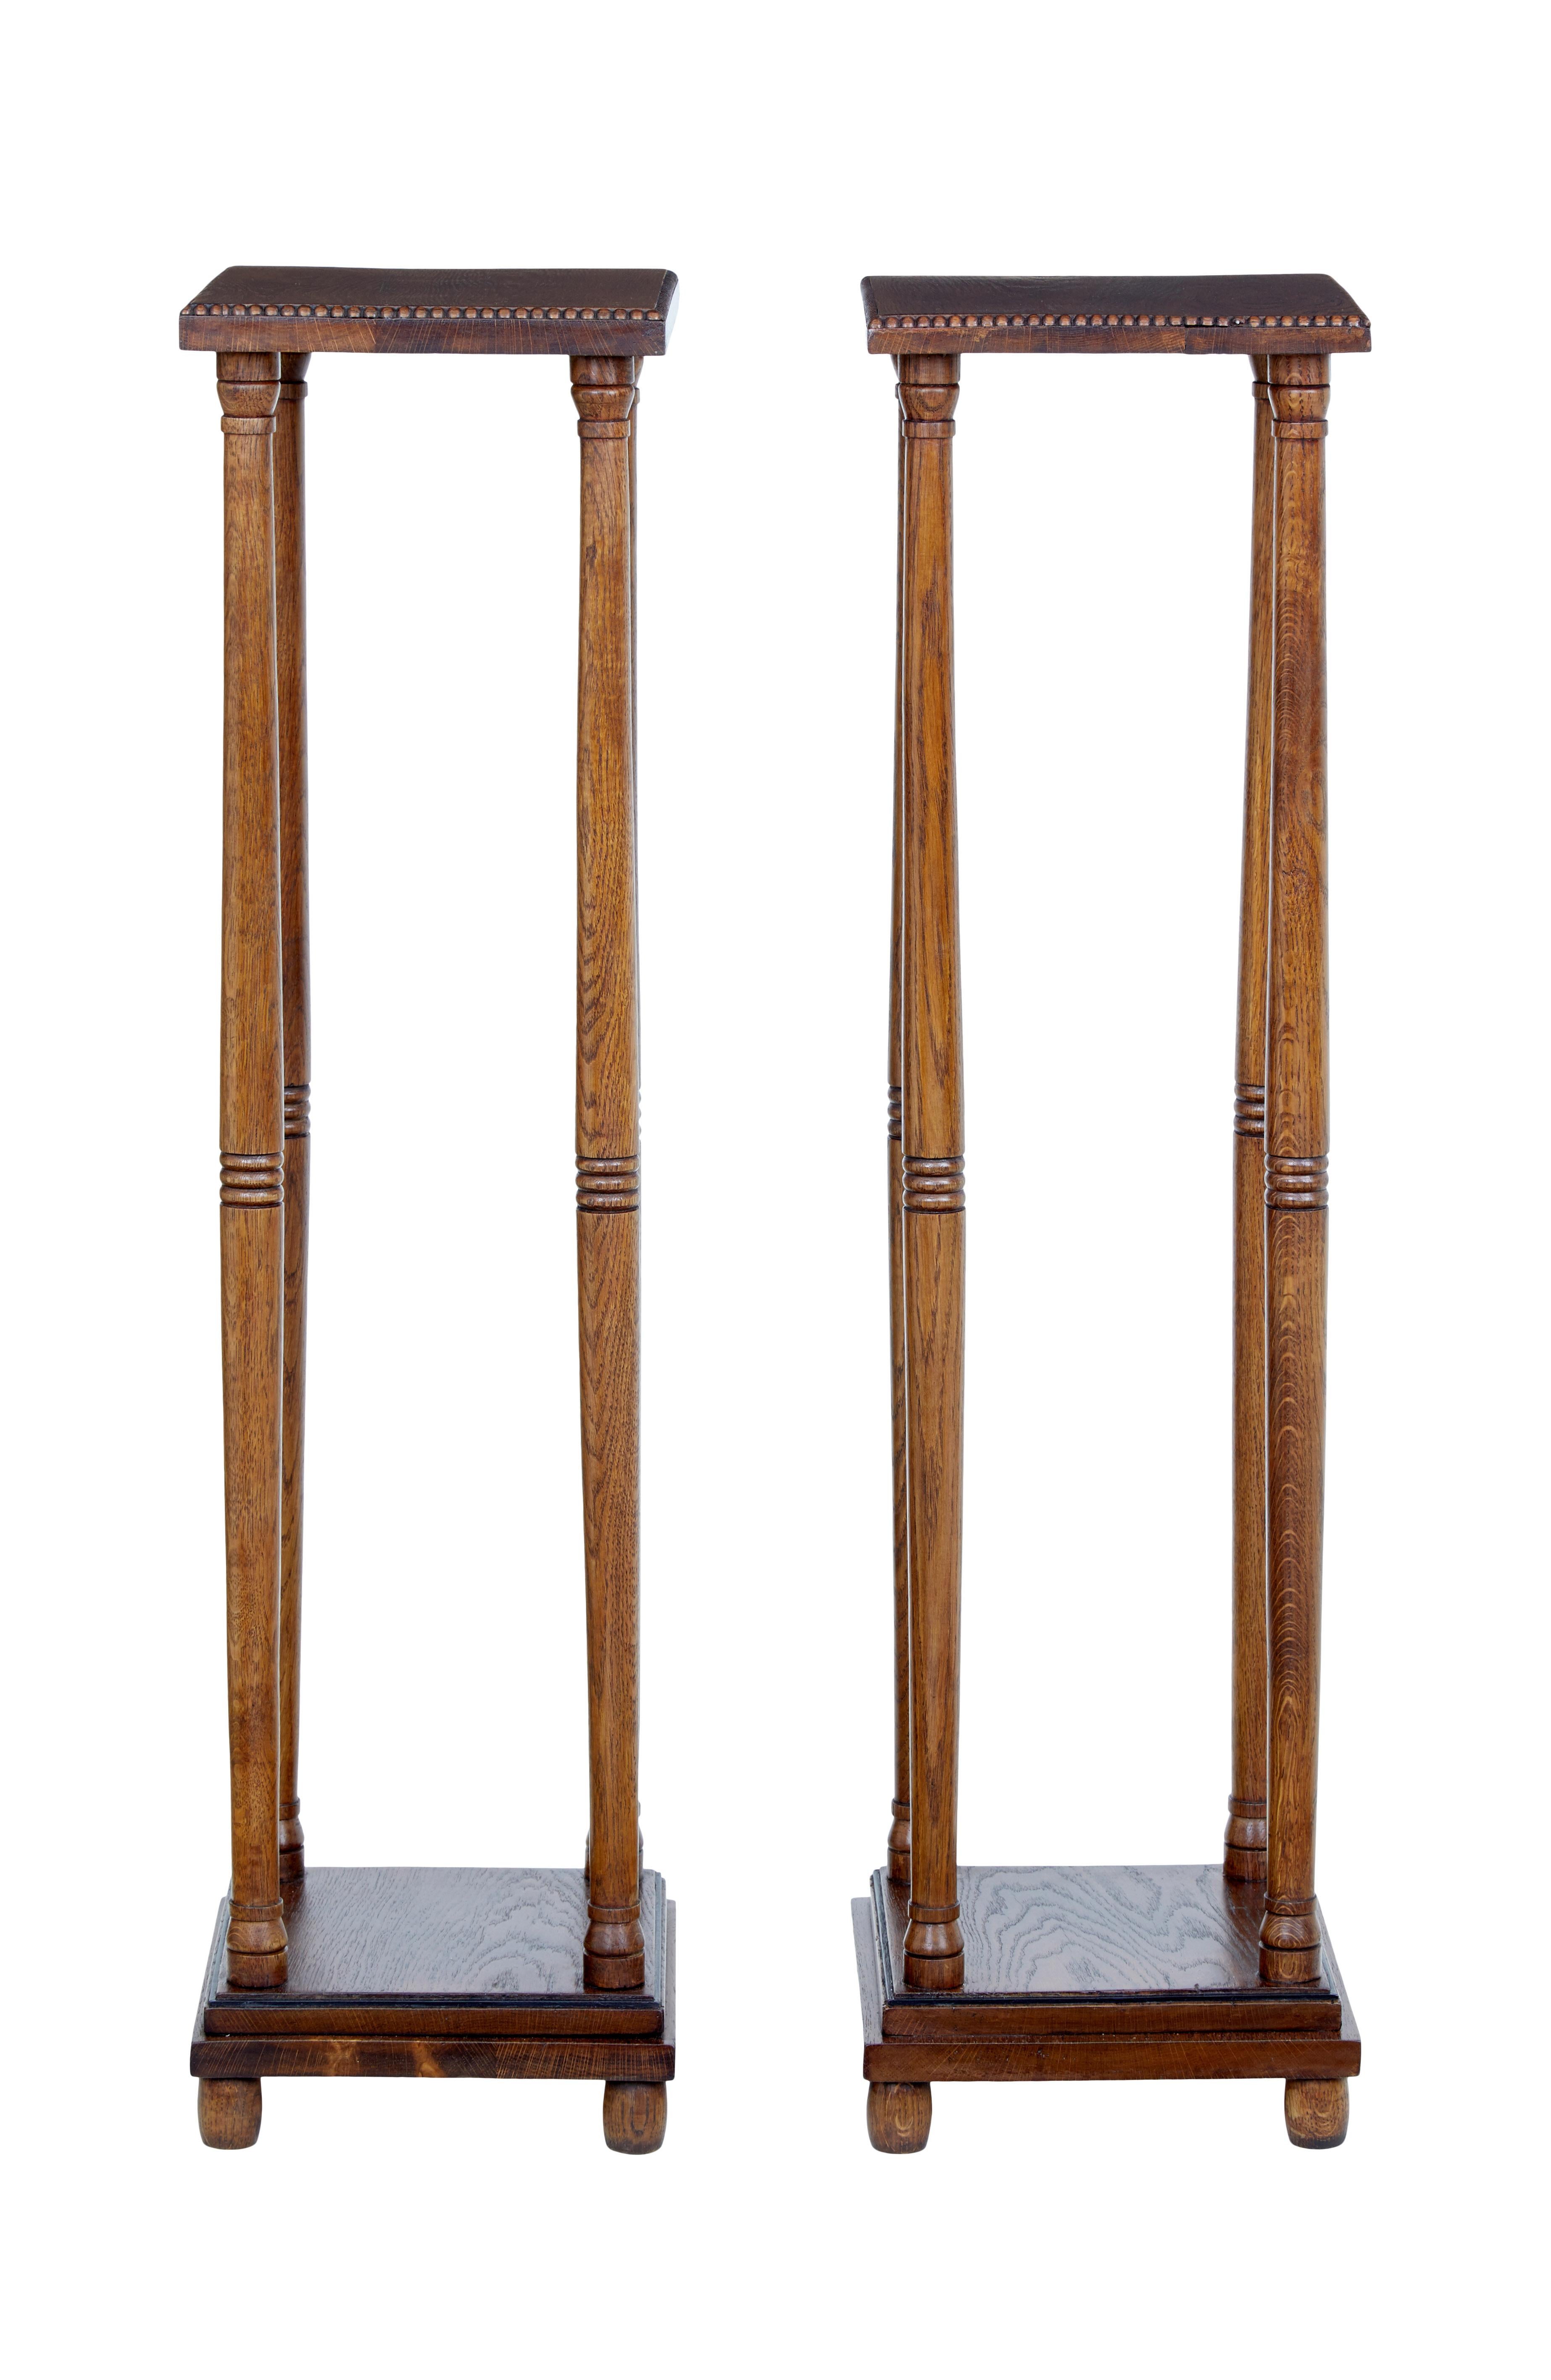 Good quality pair of stands, circa 1900.

Near square top with beaded outer edge. 4 turned supports on each stand which links down to the square stepped base. Base with ebony stringing detail. Standing on bobbin feet.

Ideal for floral displays